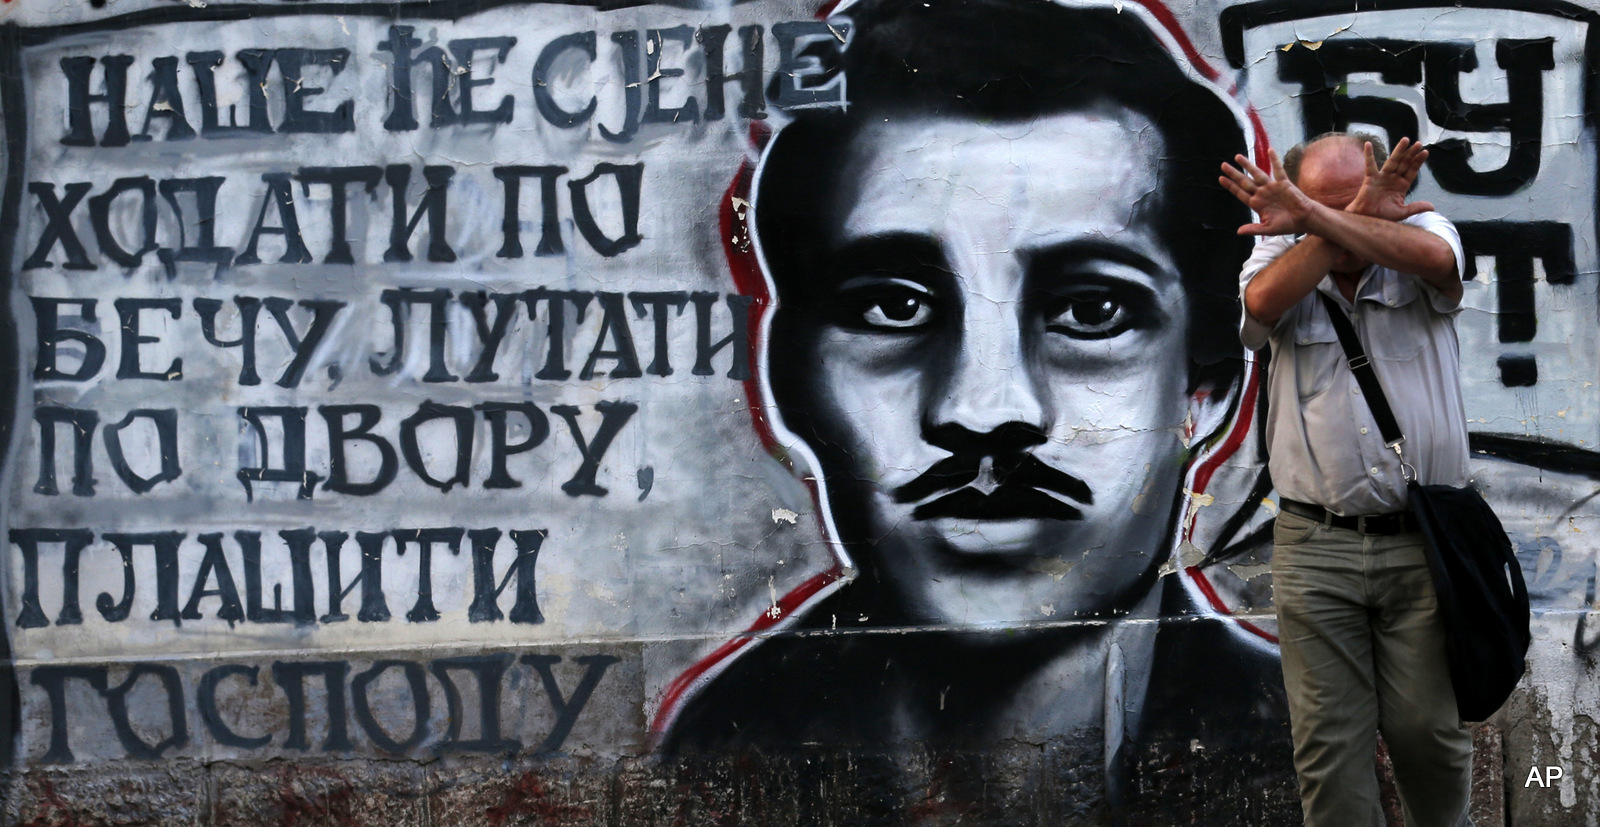 A man covers his face by graffiti on a wall showing Gavrilo Princip, the Bosnian-Serb nationalist who assassinated Archduke Franz Ferdinand in 1914, in Belgrade, Serbia, Tuesday, Aug. 30, 2016. On the left side are written the words that, by the legend, Princip inscribed on the wall of his cell shortly before his death: ''Our shadows will walk through Vienna, wander the palace, frighten the lords.''